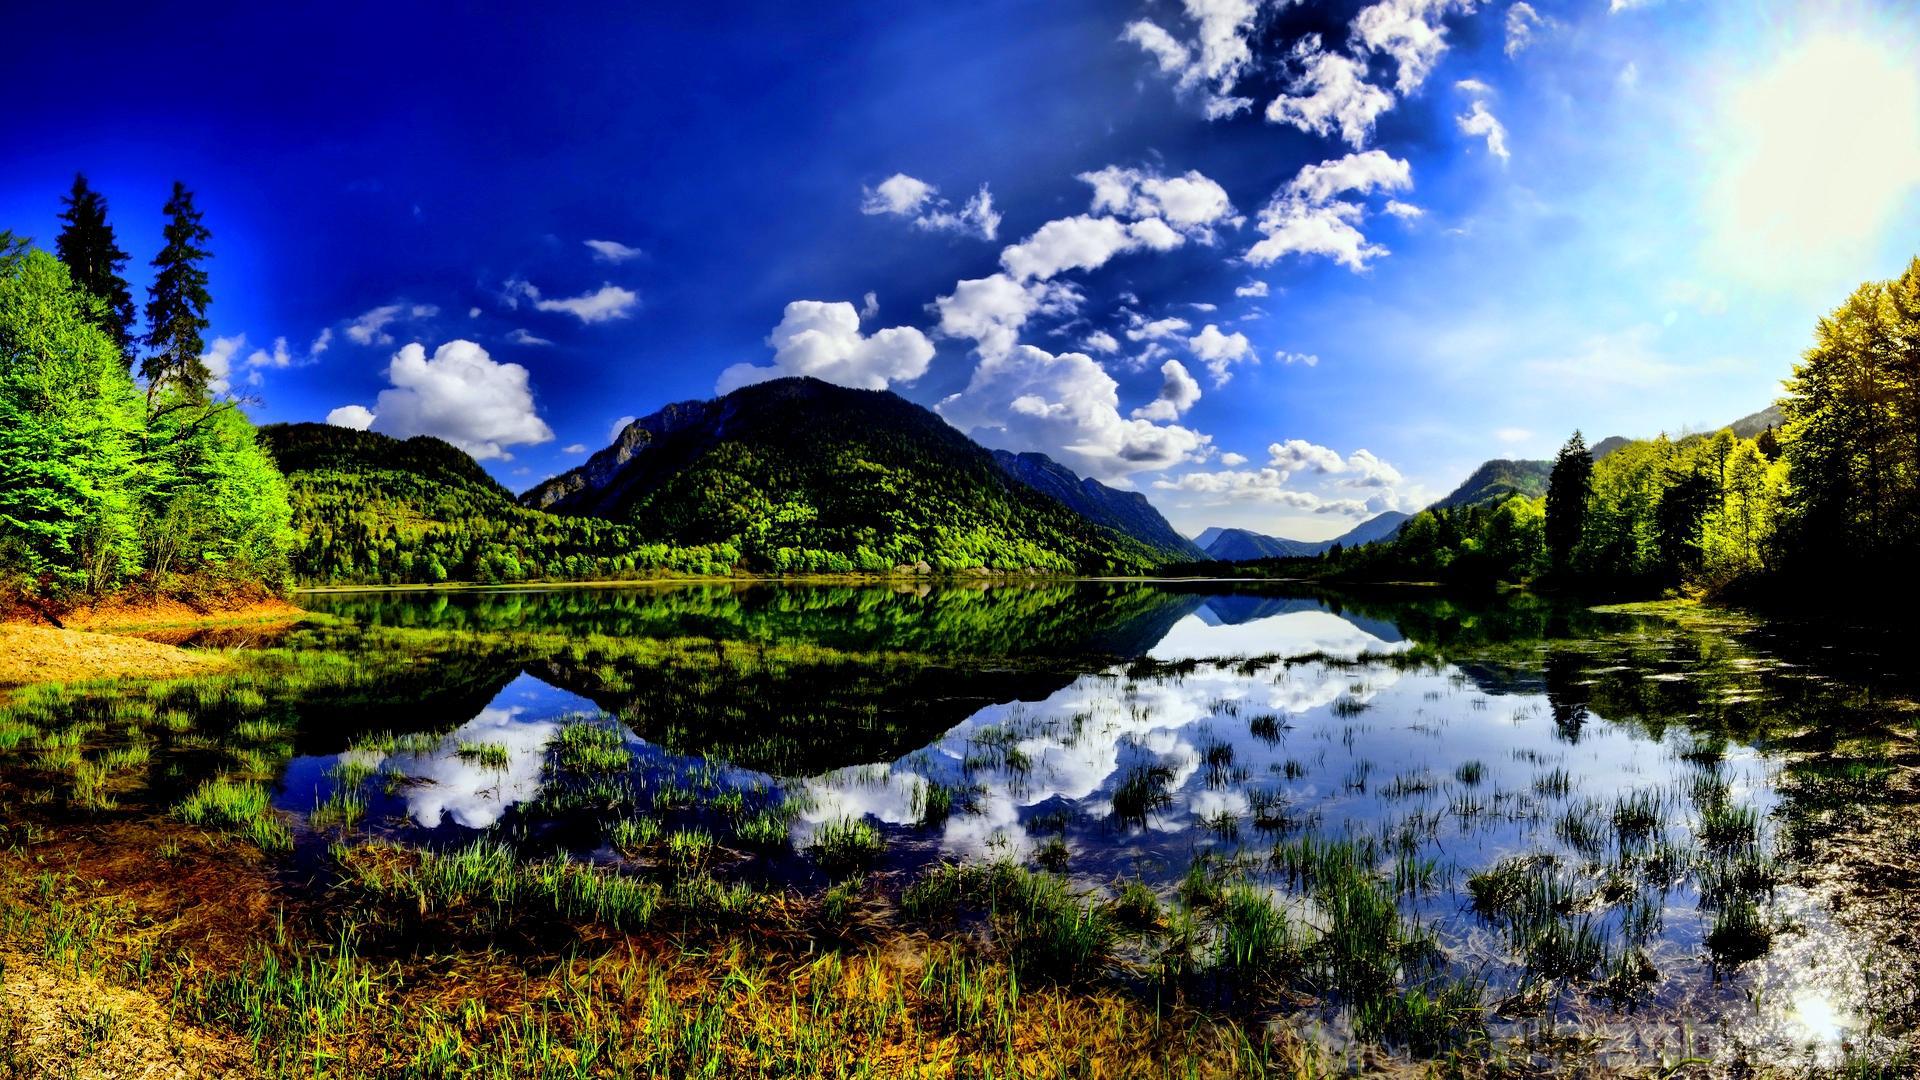 Summer Landscape Mountain Lake Pine Forest, Sky With White Clouds Reflection In The Water Wallpaper HD For Desktop Full Screen 1920x1080, Wallpaper13.com